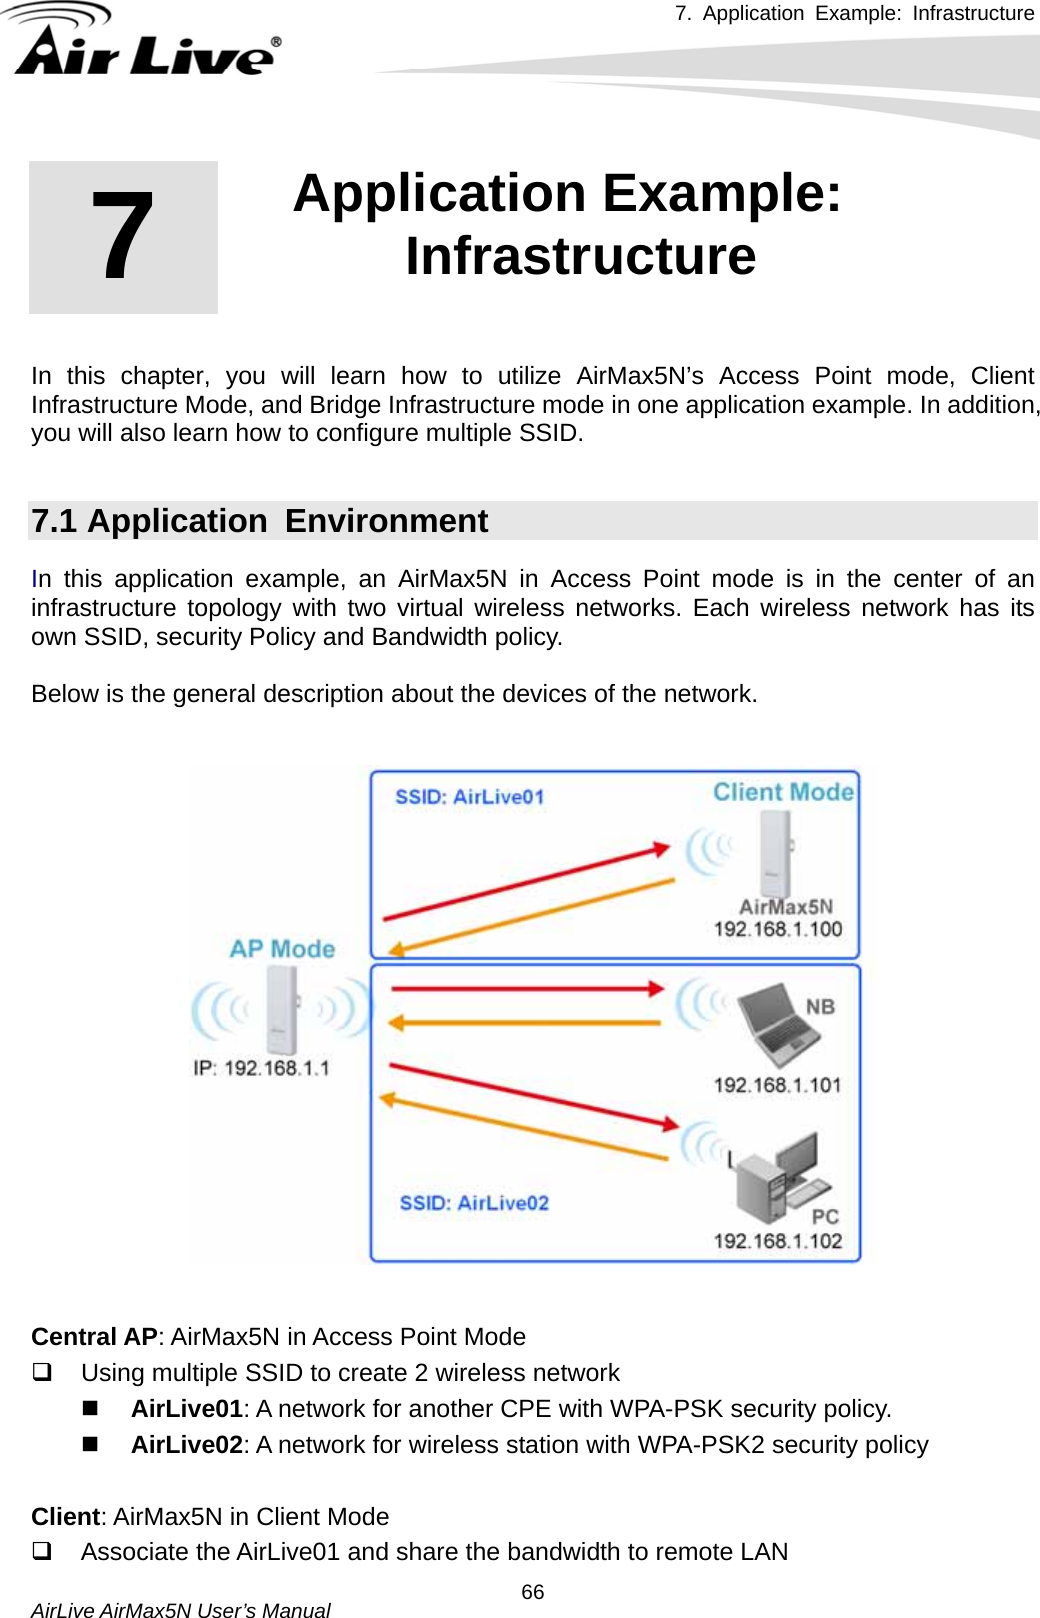 7. Application Example: Infrastructure    AirLive AirMax5N User’s Manual  66       In this chapter, you will learn how to utilize AirMax5N’s Access Point mode, Client Infrastructure Mode, and Bridge Infrastructure mode in one application example. In addition, you will also learn how to configure multiple SSID.    7.1 Application  Environment In this application example, an AirMax5N in Access Point mode is in the center of an infrastructure topology with two virtual wireless networks. Each wireless network has its own SSID, security Policy and Bandwidth policy.    Below is the general description about the devices of the network.      Central AP: AirMax5N in Access Point Mode   Using multiple SSID to create 2 wireless network  AirLive01: A network for another CPE with WPA-PSK security policy.  AirLive02: A network for wireless station with WPA-PSK2 security policy  Client: AirMax5N in Client Mode   Associate the AirLive01 and share the bandwidth to remote LAN 7  7. Application Example: Infrastructure    